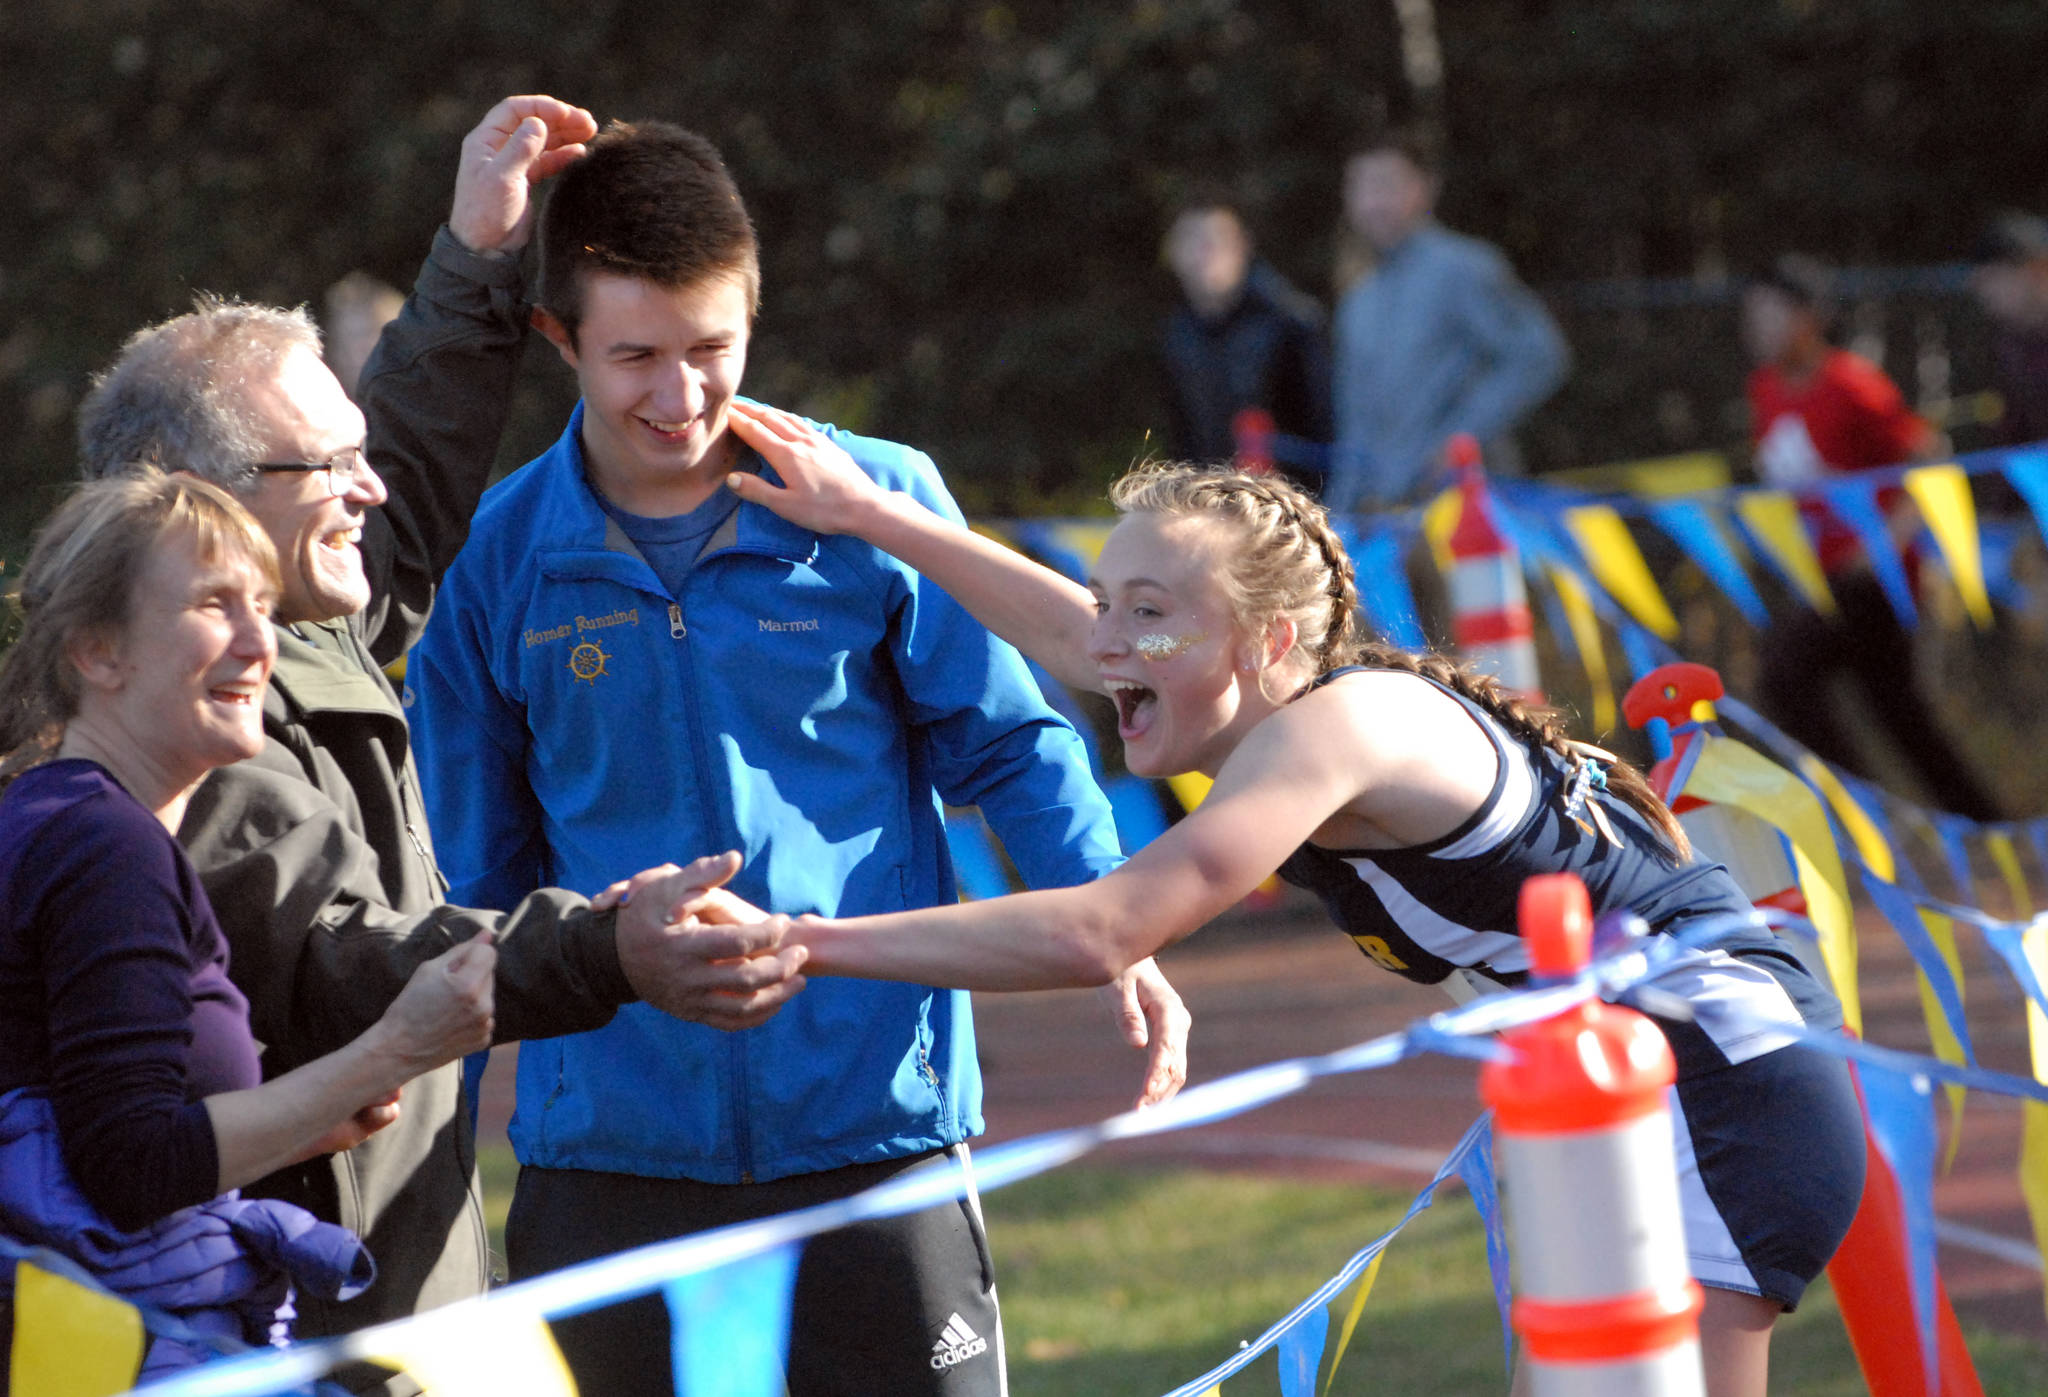 Homer freshman Autumn Daigle celebrates her victory in the Division II girls race with her mom, Anne, dad, Patrick, and teammate Jordan Beachy at the ASAA/First National Bank Alaska State Cross Country Championships on Saturday, Sept. 30, 2017 at Bartlett High School in Anchorage, Alaska. (Photo by Matt Tunseth/Chugiak-Eagle River Star)